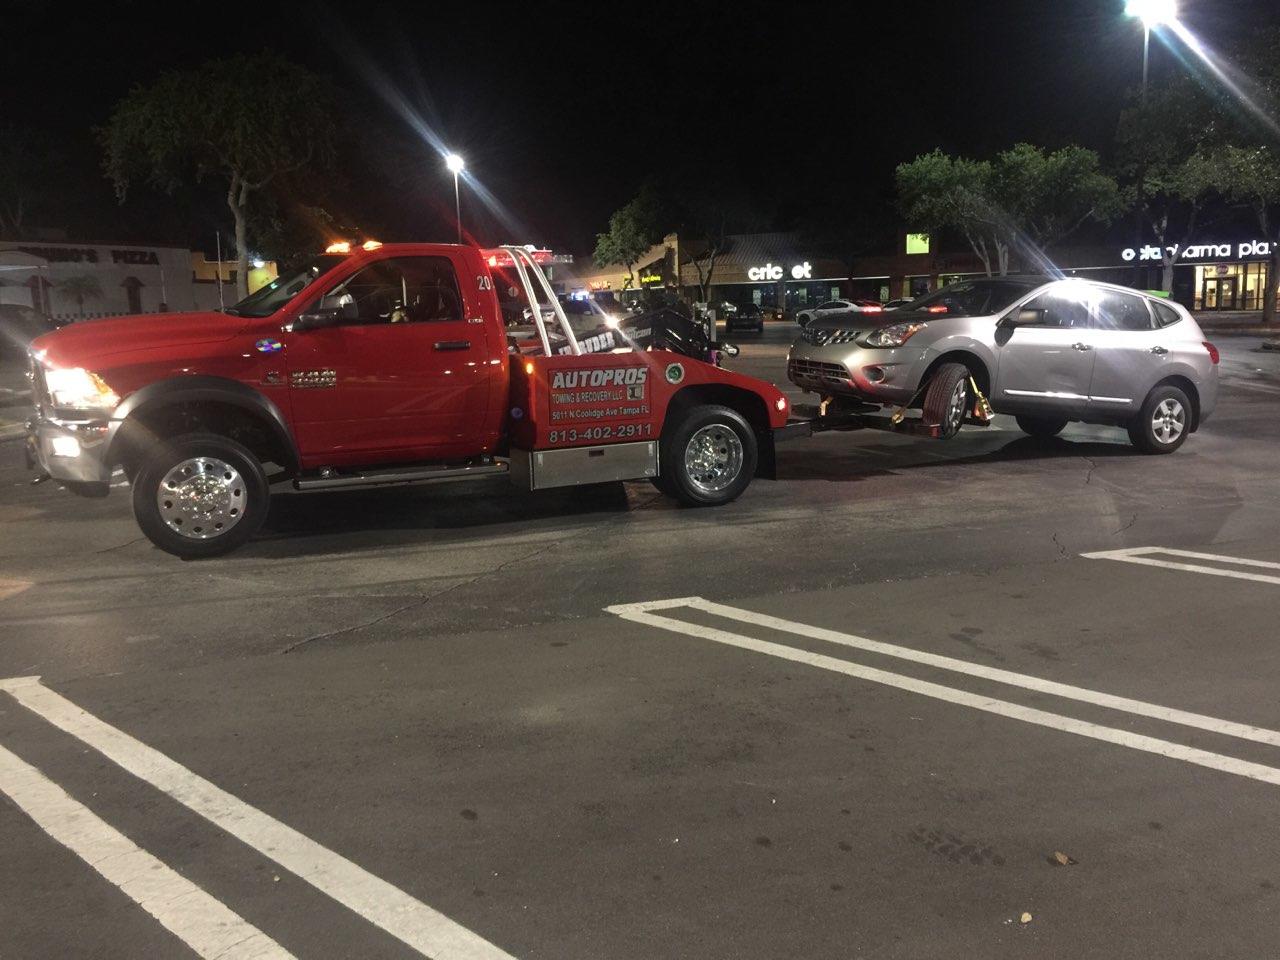 Autopros Towing & Recovery LLC delivers the safest, most reliable towing services in Tampa, FL. We are quickly building a reputation as the area’s most professional and courteous towing company. With more than 20 years of experience behind us, you can rest assured that your vehicle will be in good shape thanks to our towing and roadside assistance services.